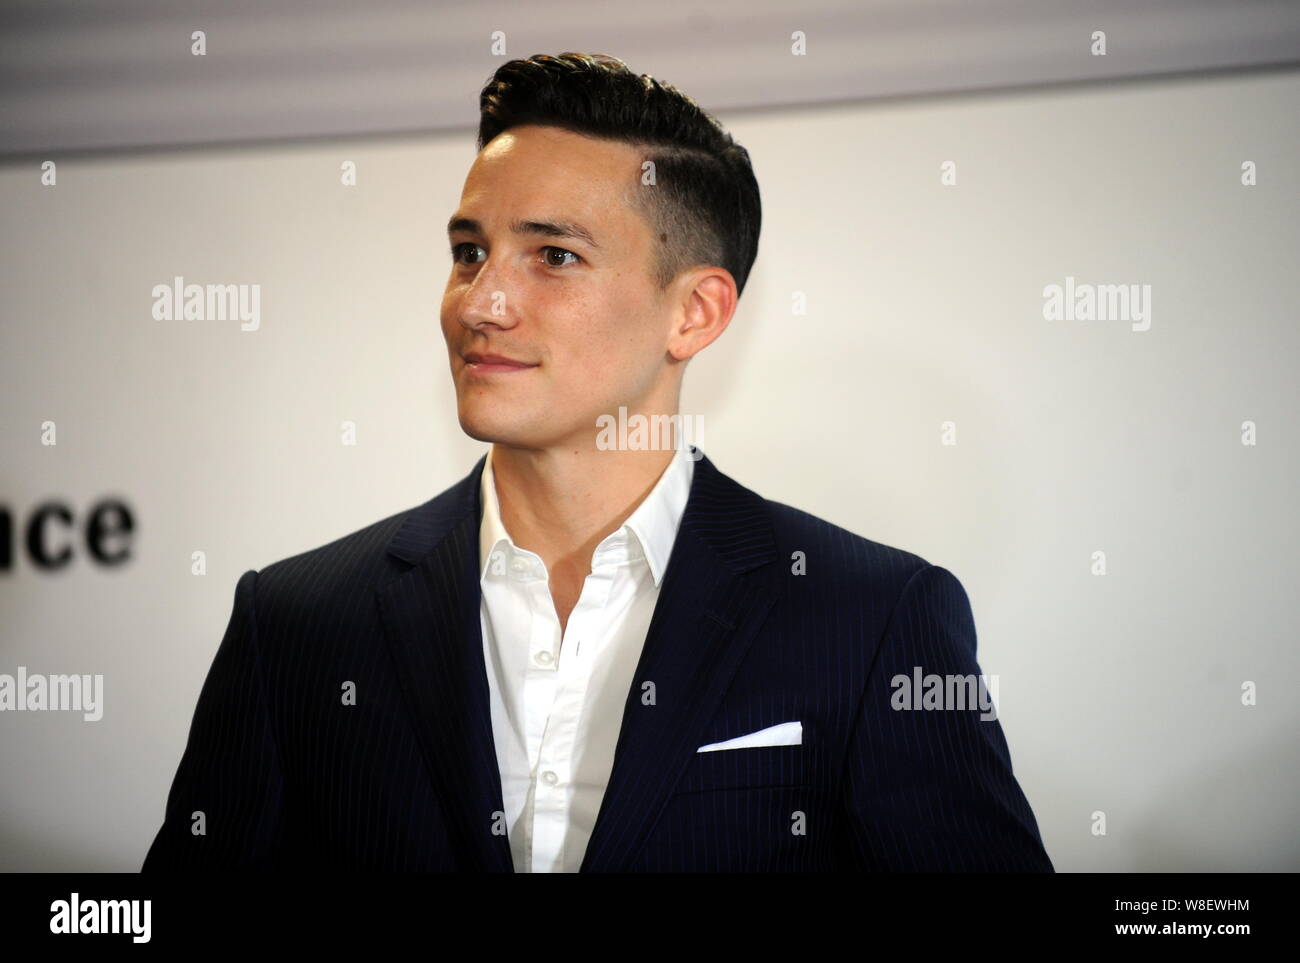 German gymnast Marcel Nguyen poses during a press conference for the 2015 Porsche Carrera Cup Asia season in Hong Kong, China, 1 April 2015. Stock Photo